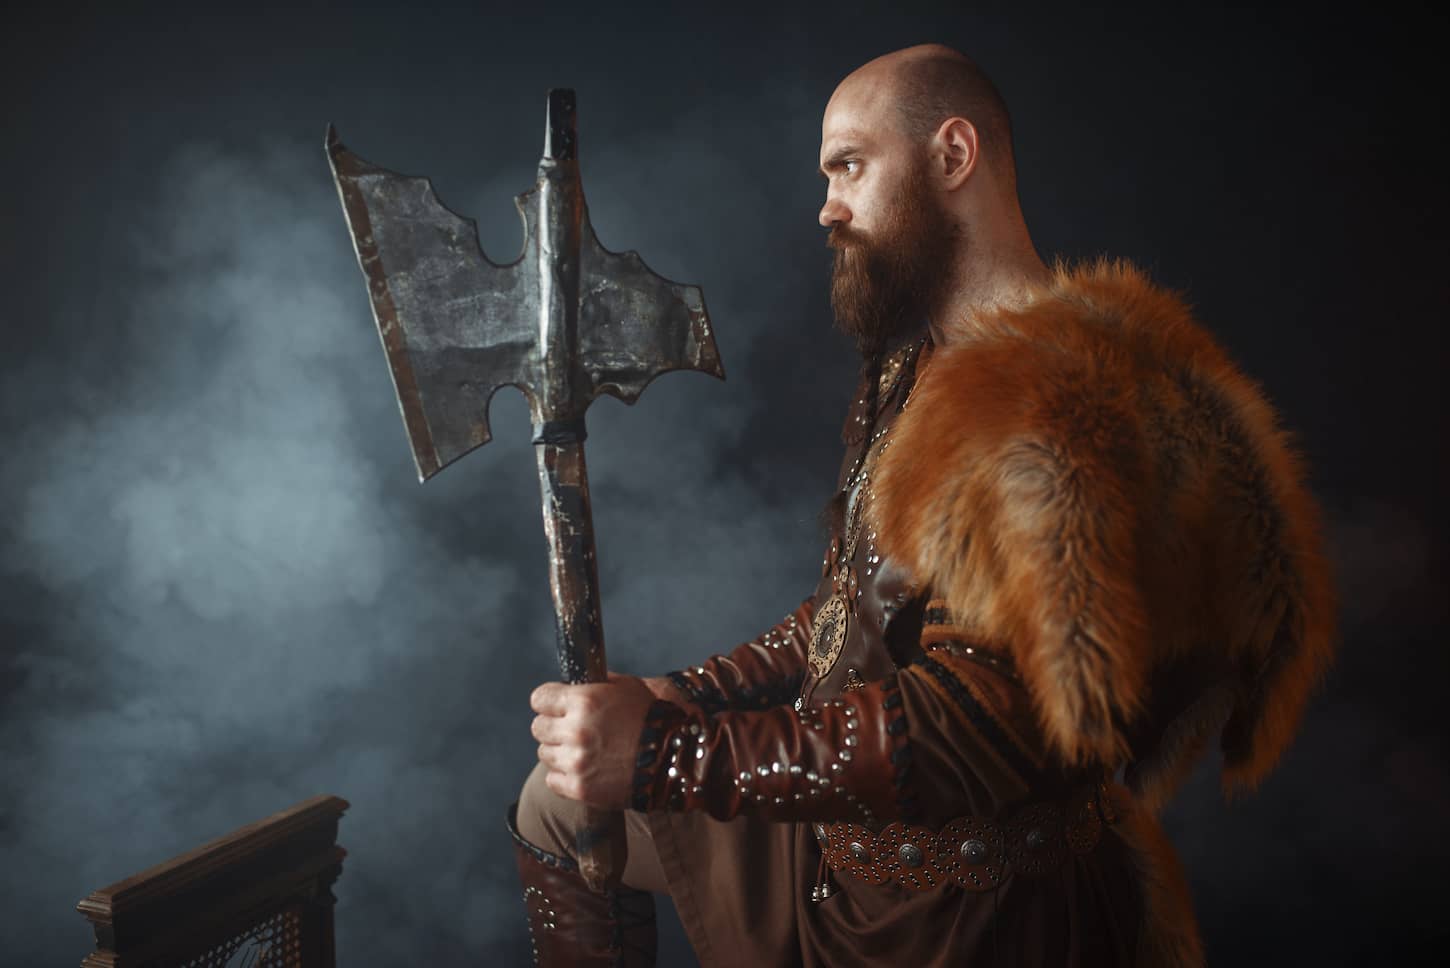 An image of a Viking with an axe, martial spirit, barbarian image, side view. Ancient warrior in smoke on dark background.